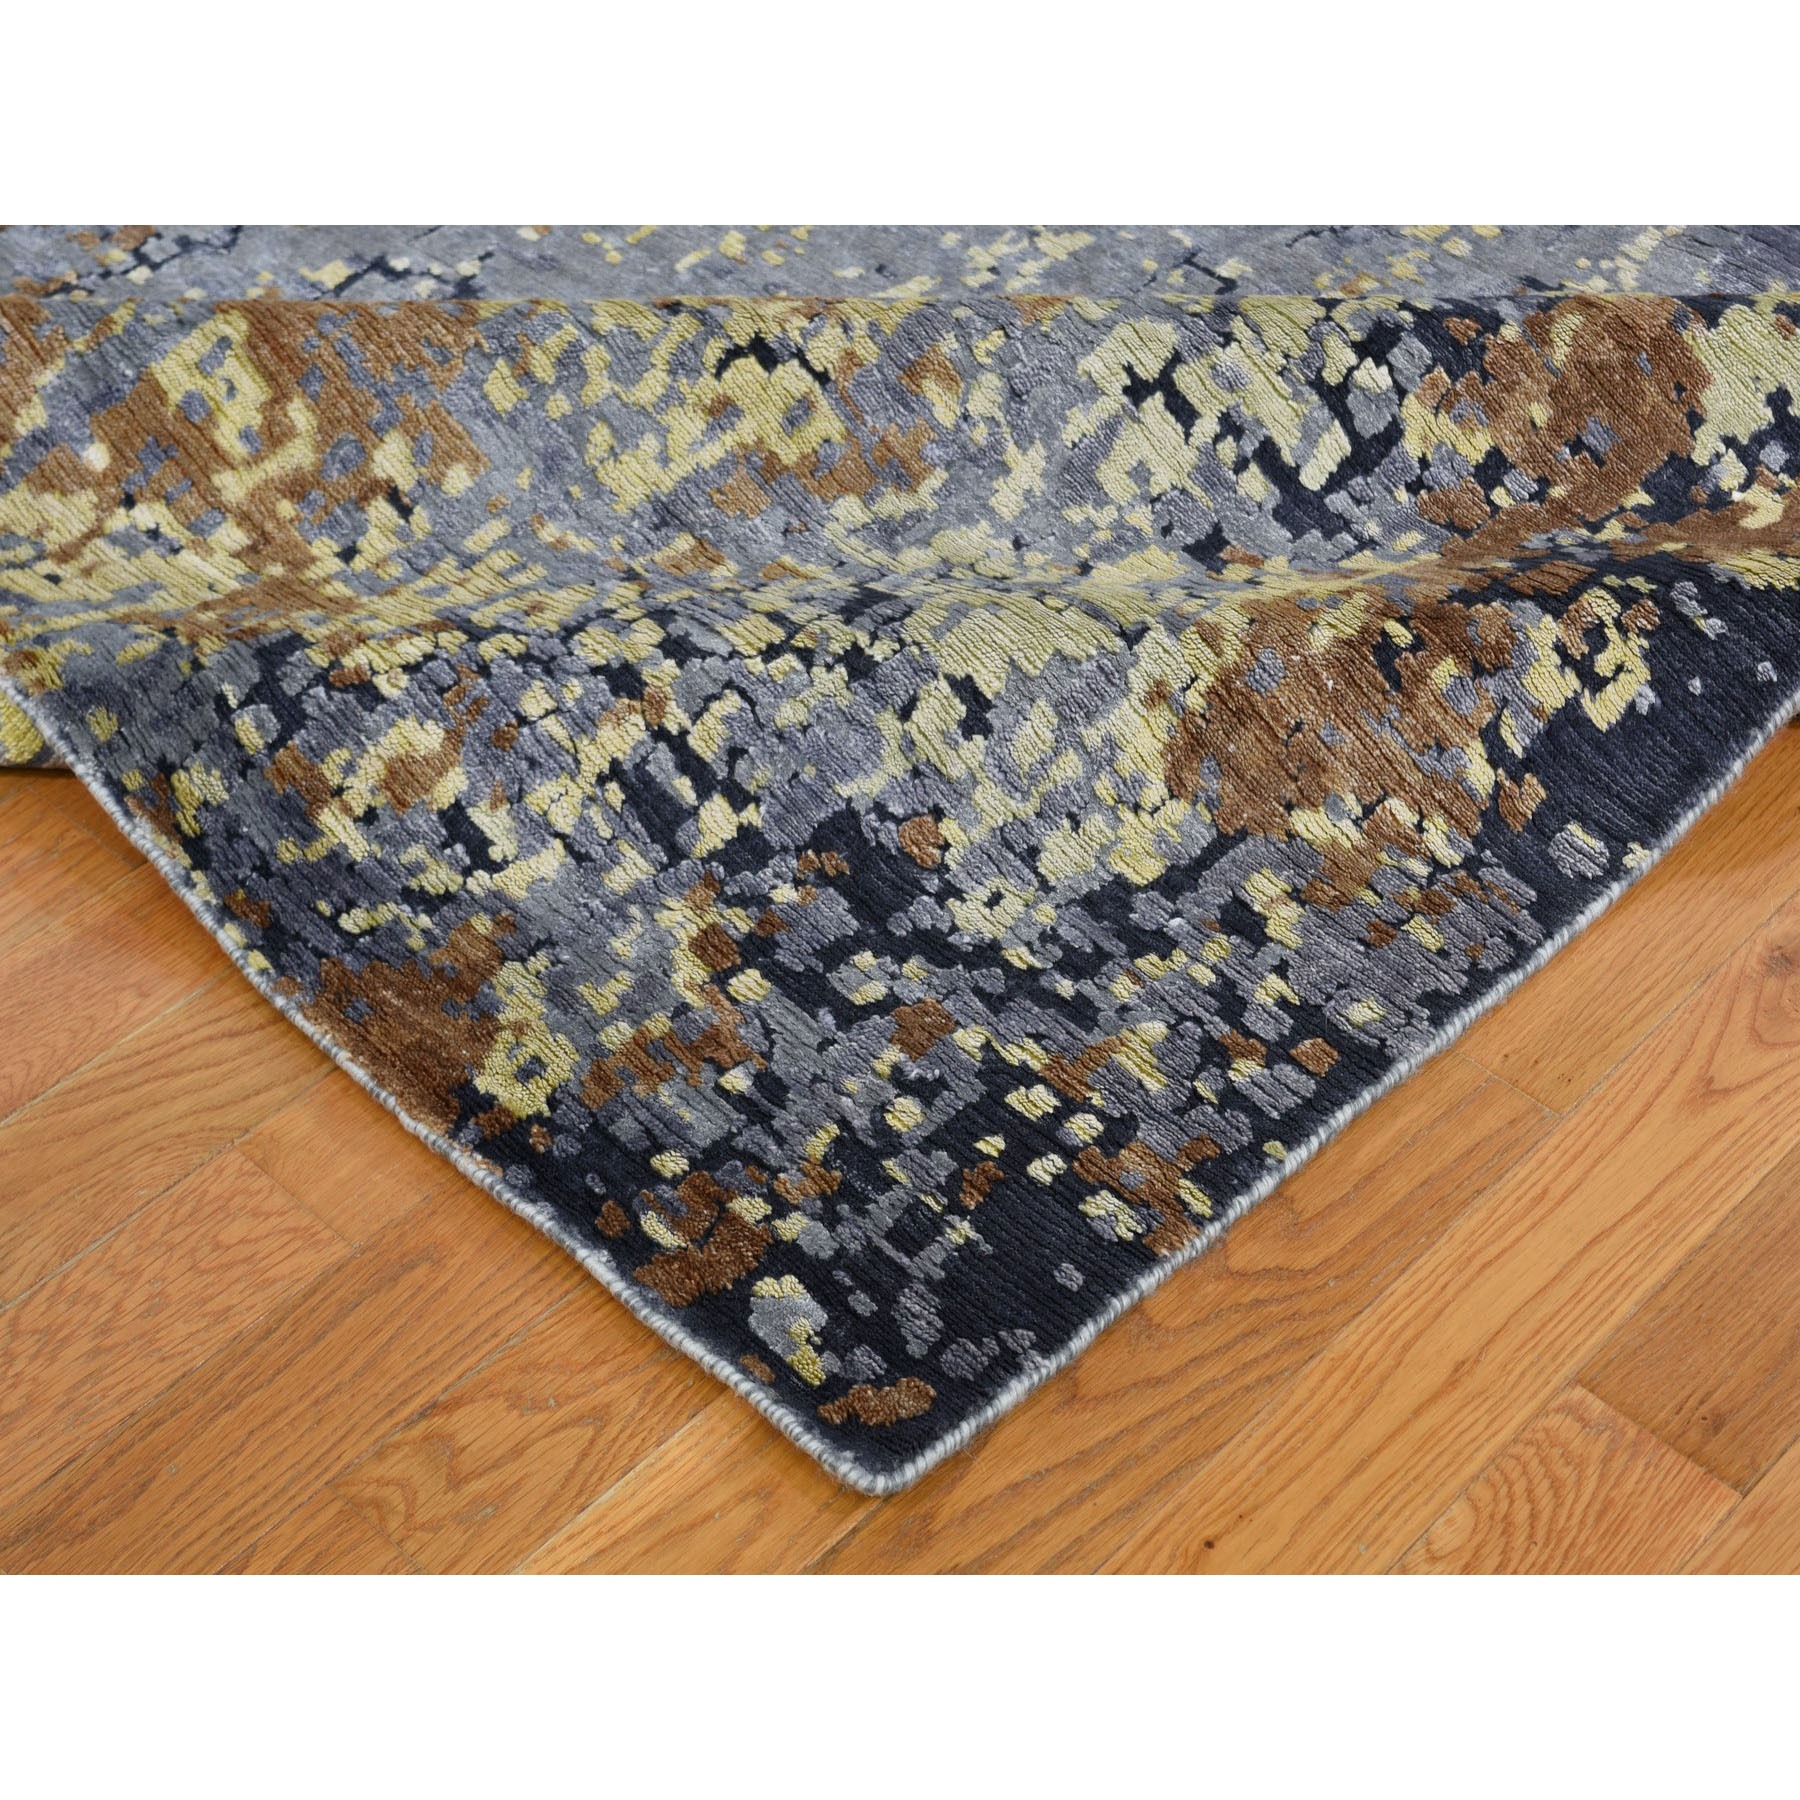 8-10 x12- Light BlueAbstract Design Wool and Silk Hi-Low Pile Hand Knotted Oriental Rug 